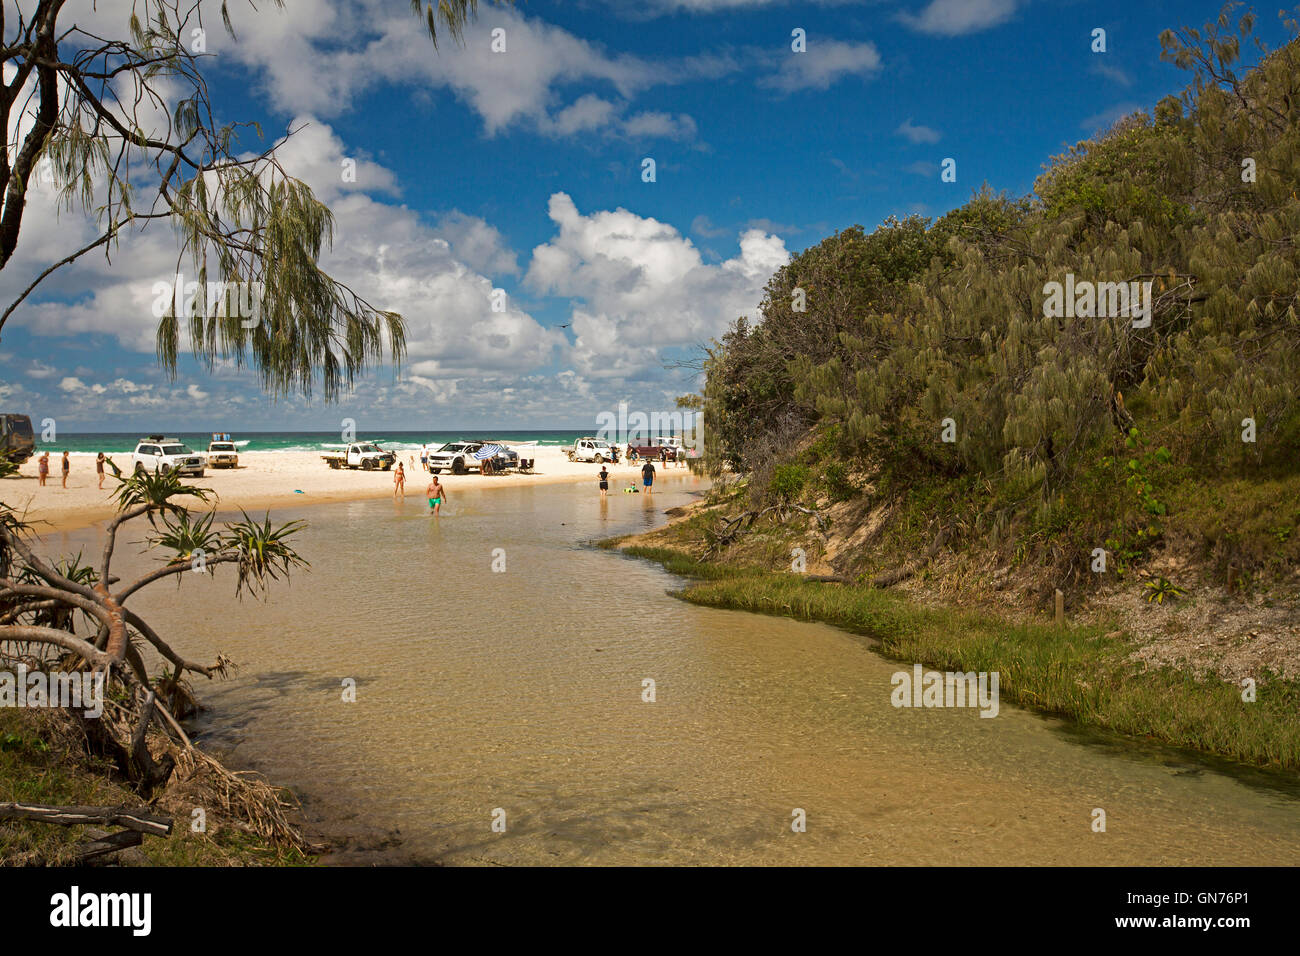 Group of four wheel drive vehicles & people on sandy beach beside Eli Creek with others wading in shallow water on Fraser Island Stock Photo